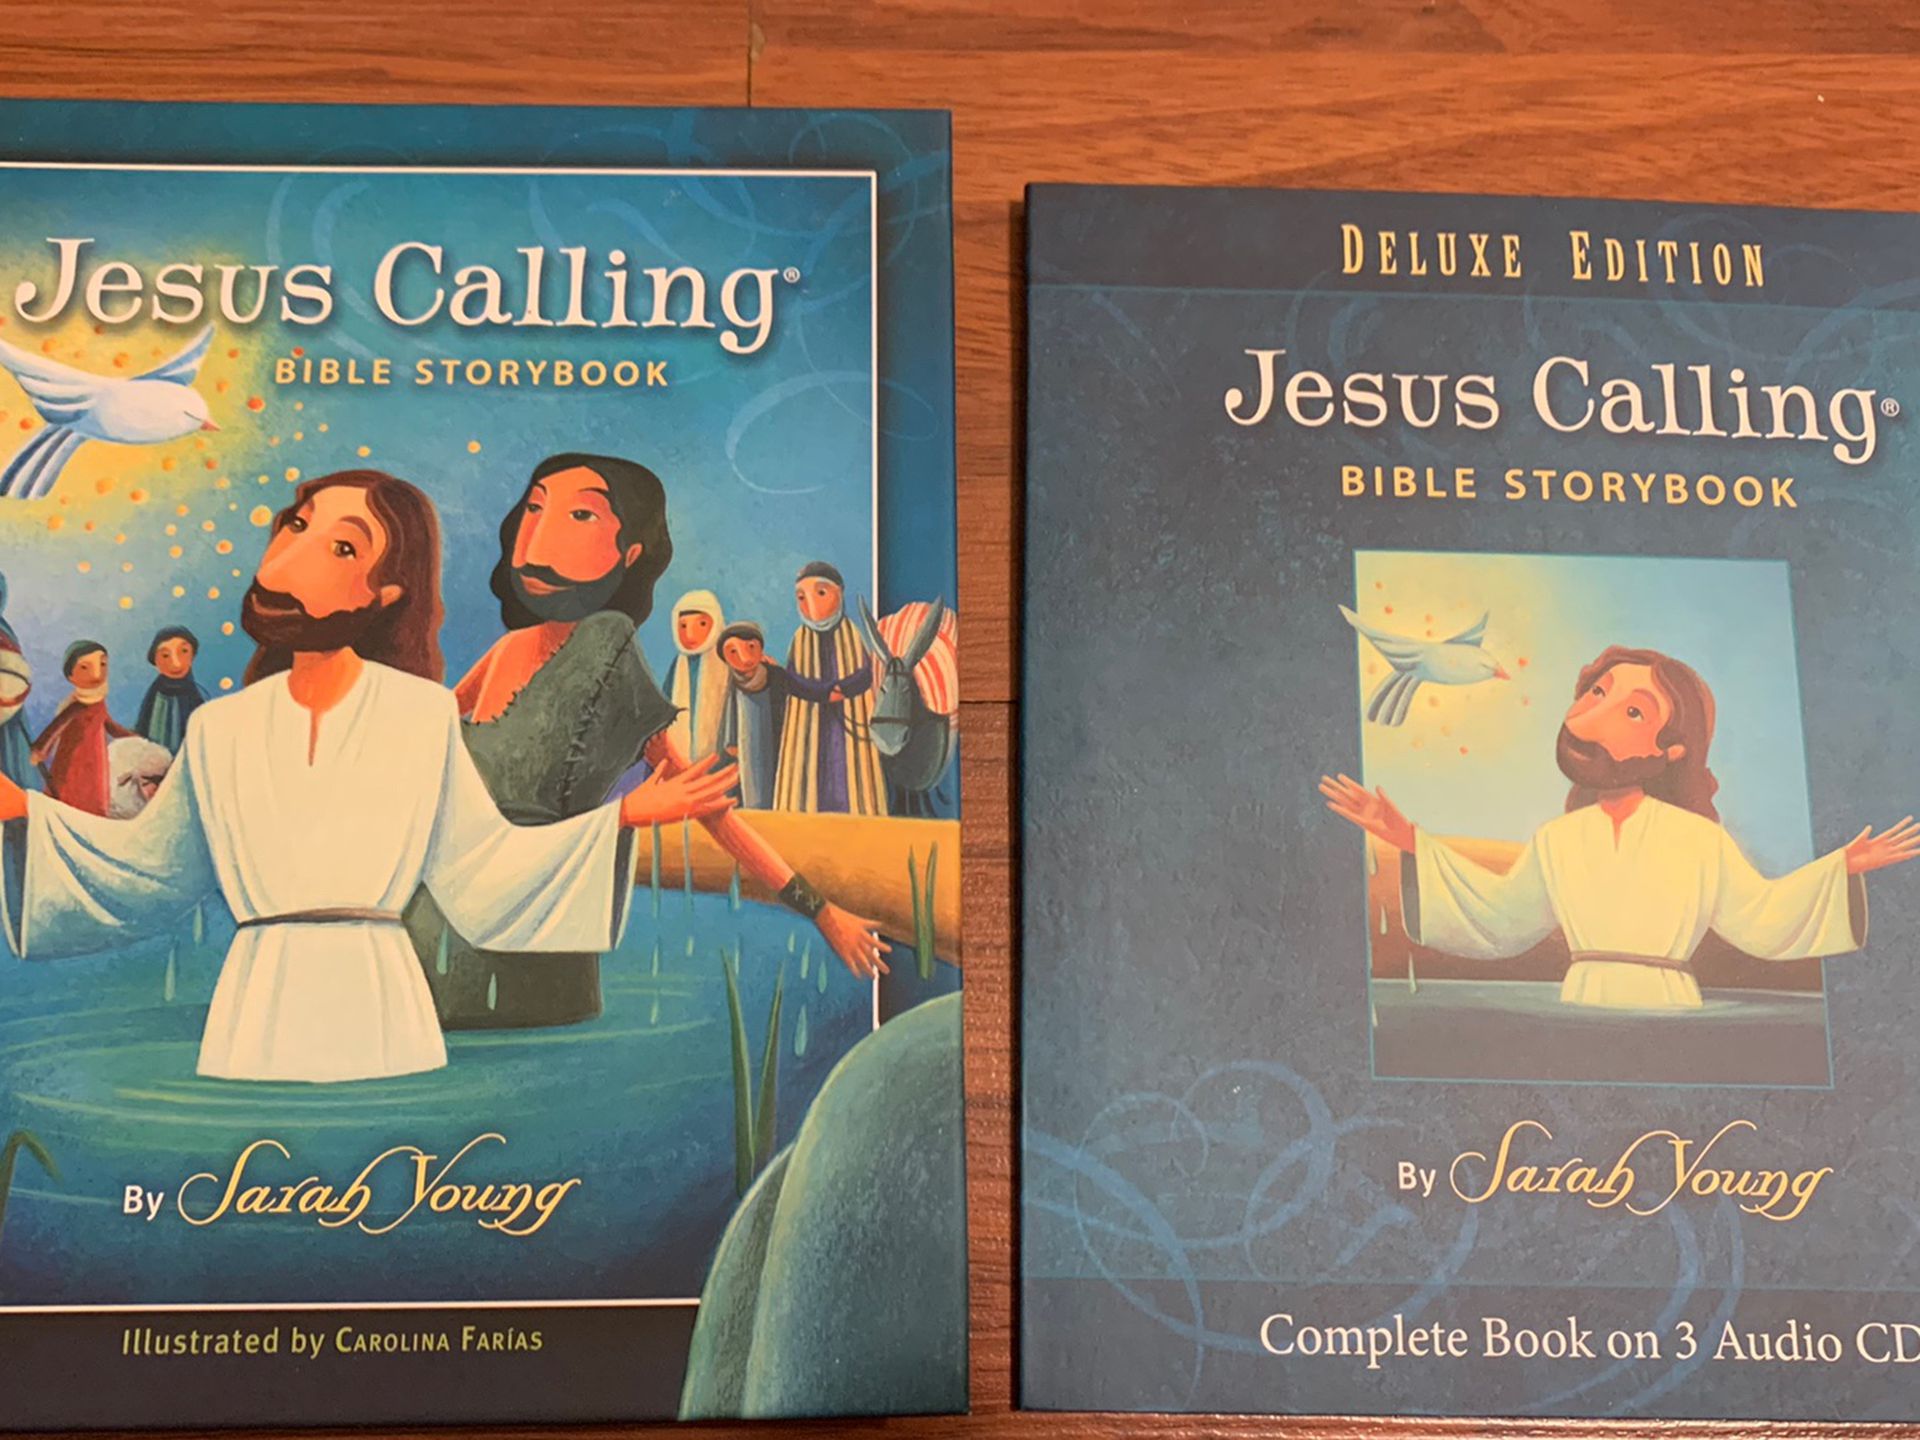 Jesus Calling Bible Storybook By Sarah Young Hardcover With 3 Audio CDs NEW